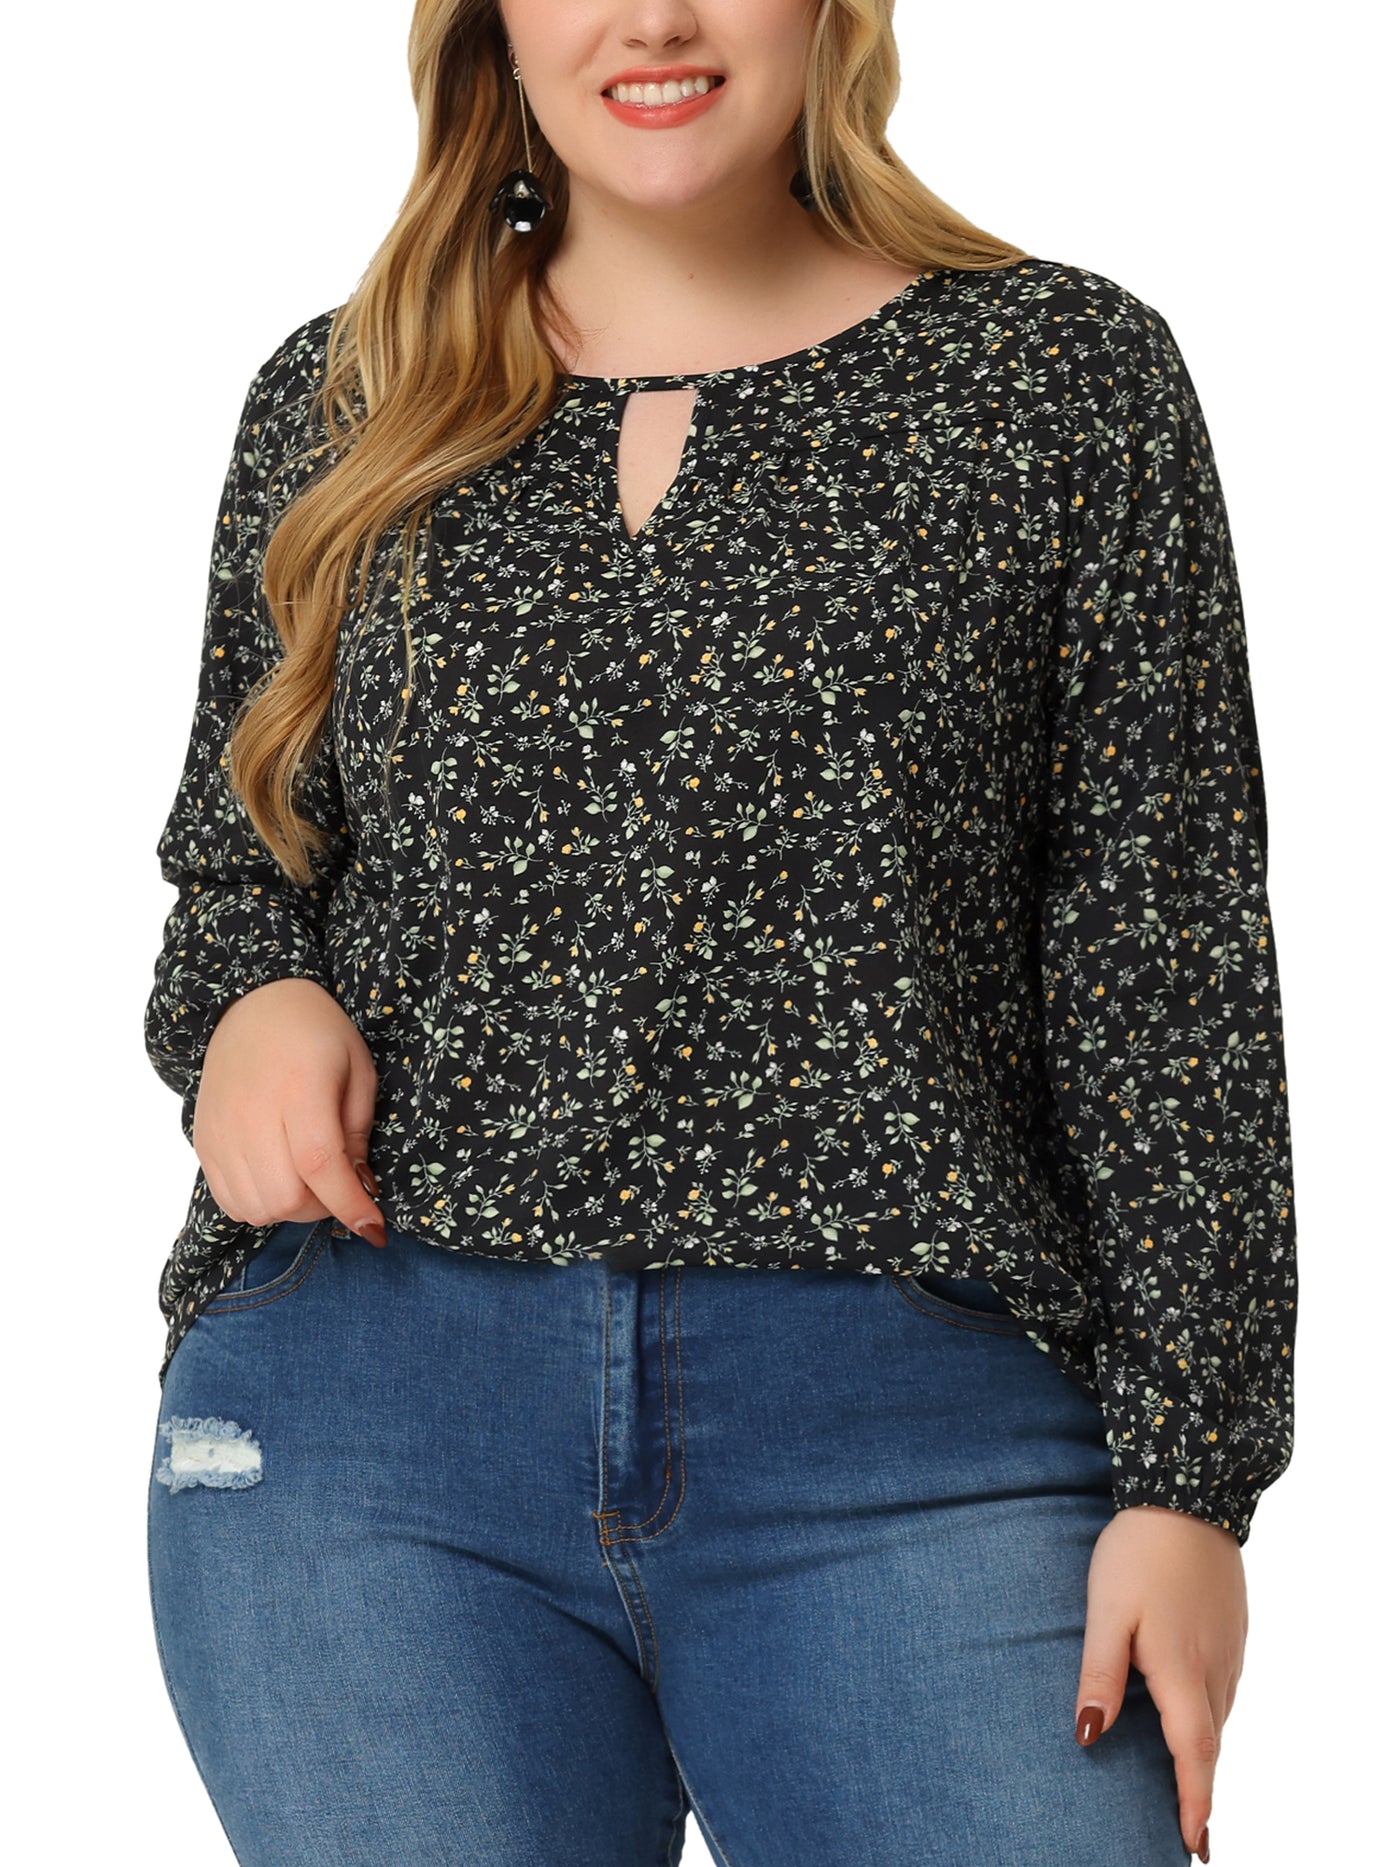 Bublédon Woven Straight Line Ditsy Floral Round Neck Blouse